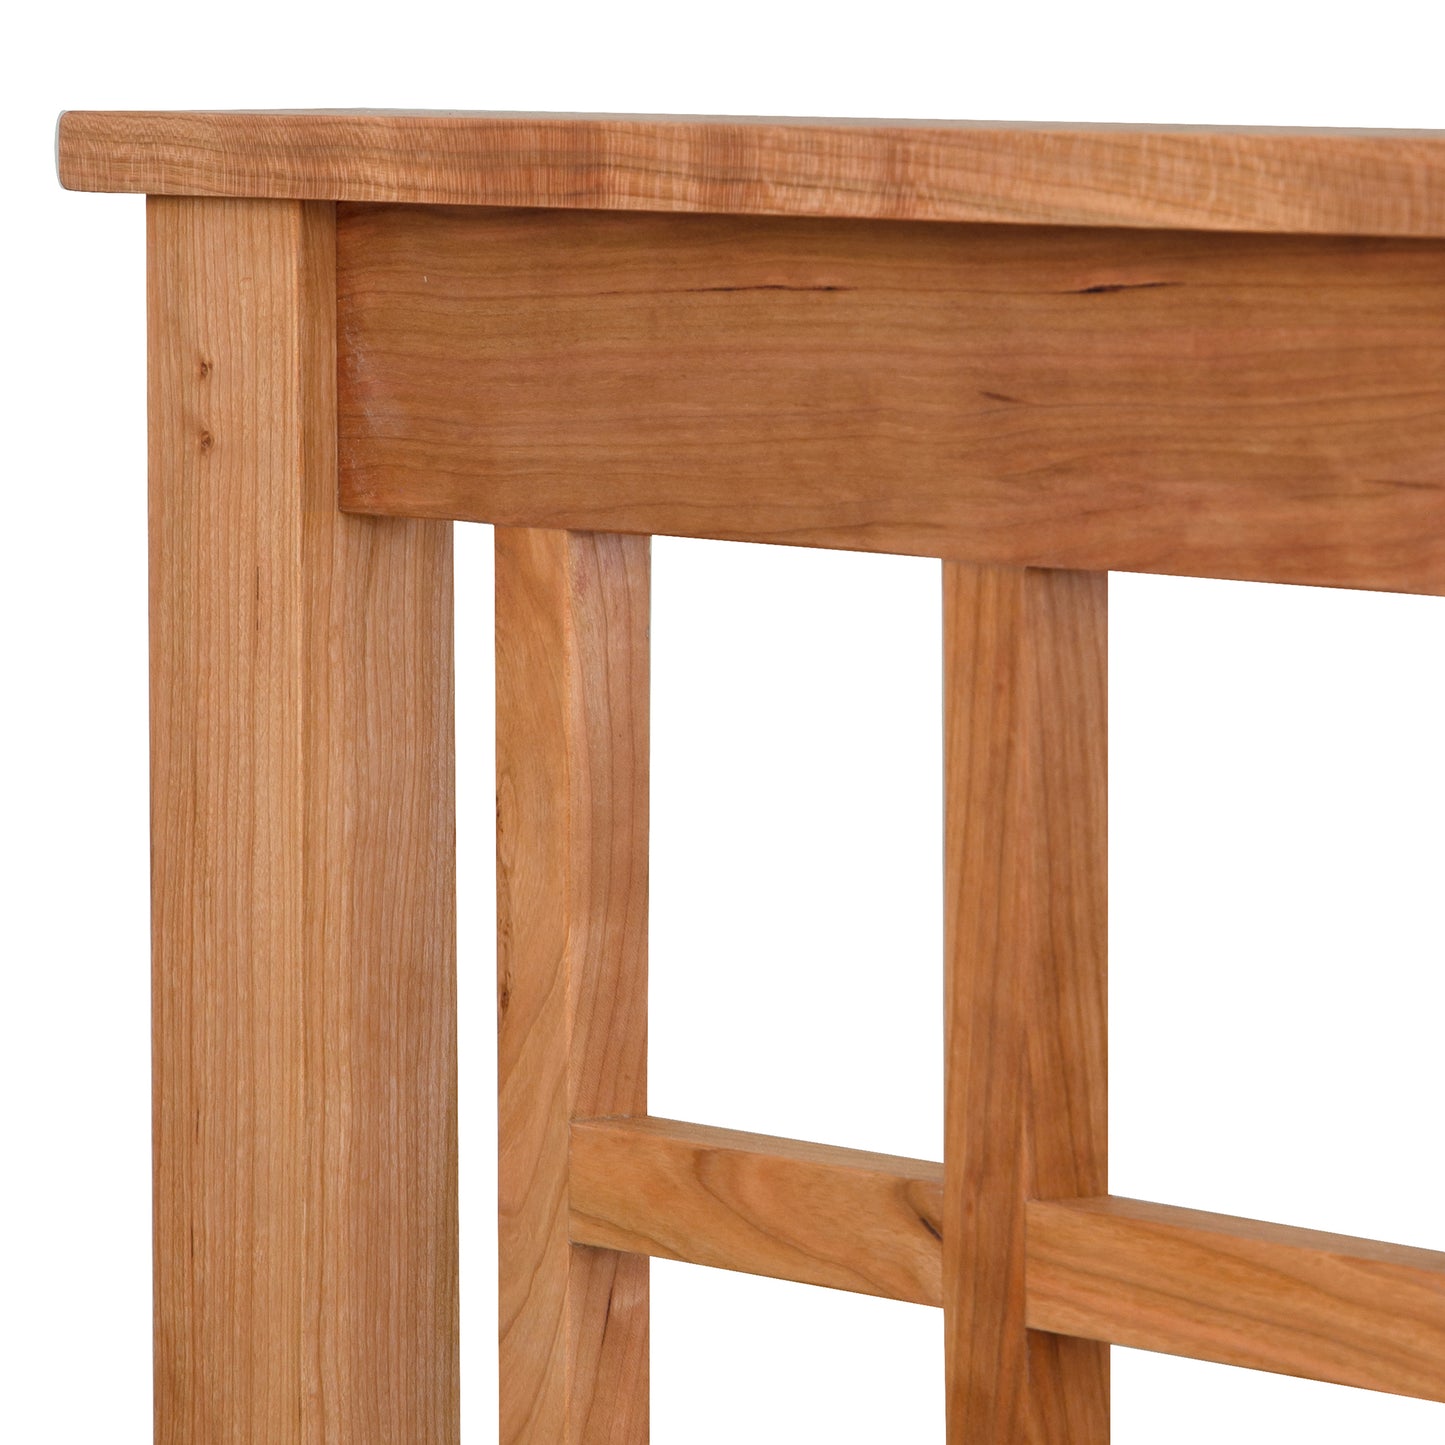 Close-up of a Vermont Furniture Designs Modern Craftsman High Footboard Bed corner showing detail of the wood grain and eco-friendly oil finish.